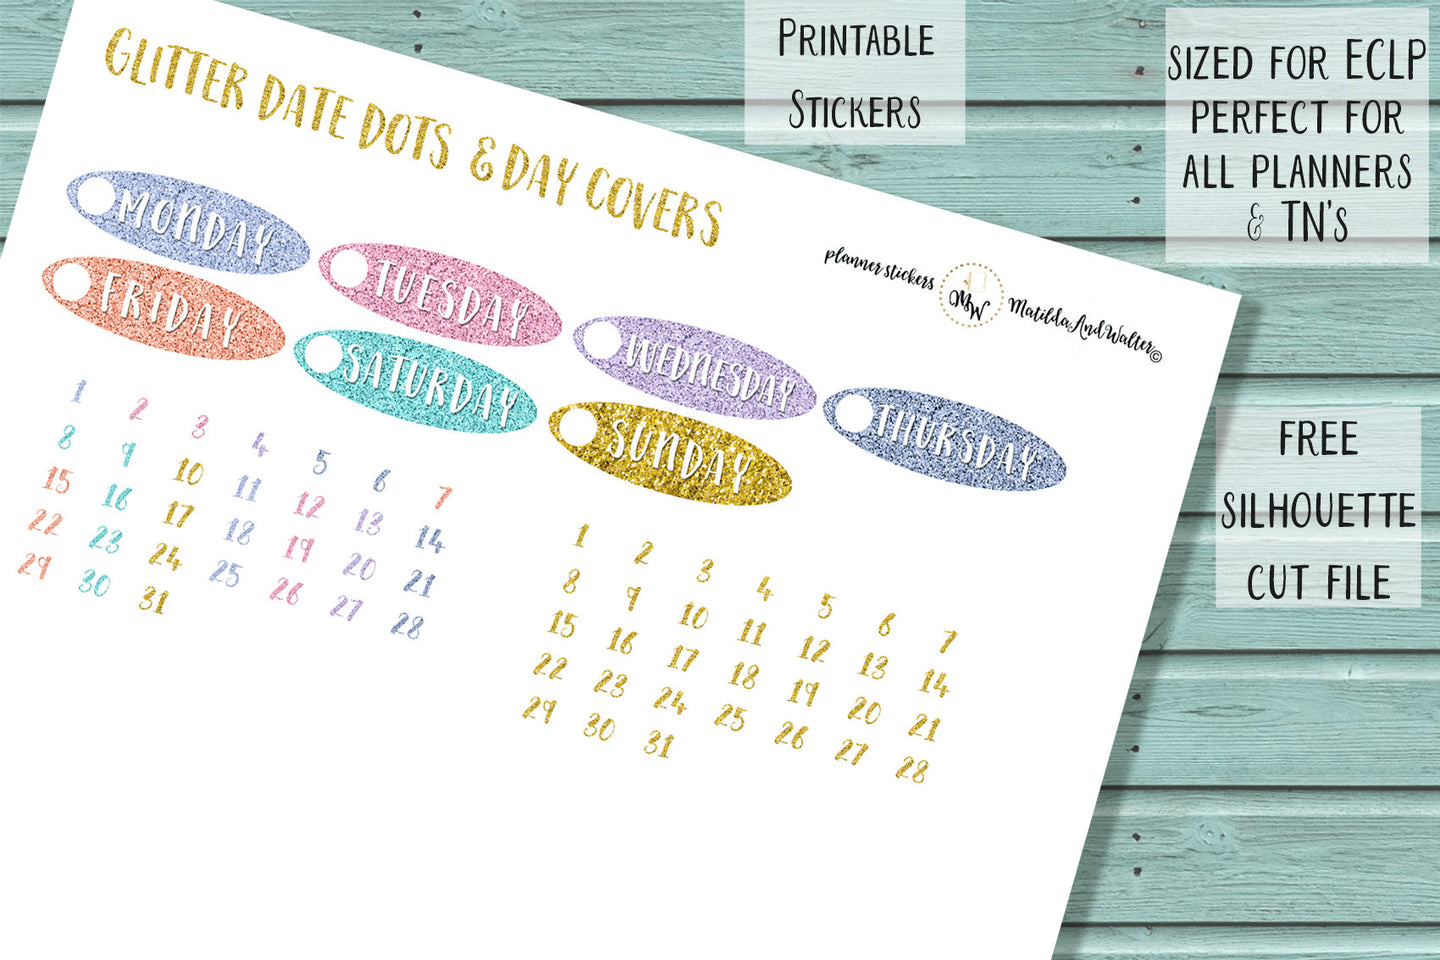 Printable Day Covers and Date Dots with a gorgeous faux glitter effect - Download and print now